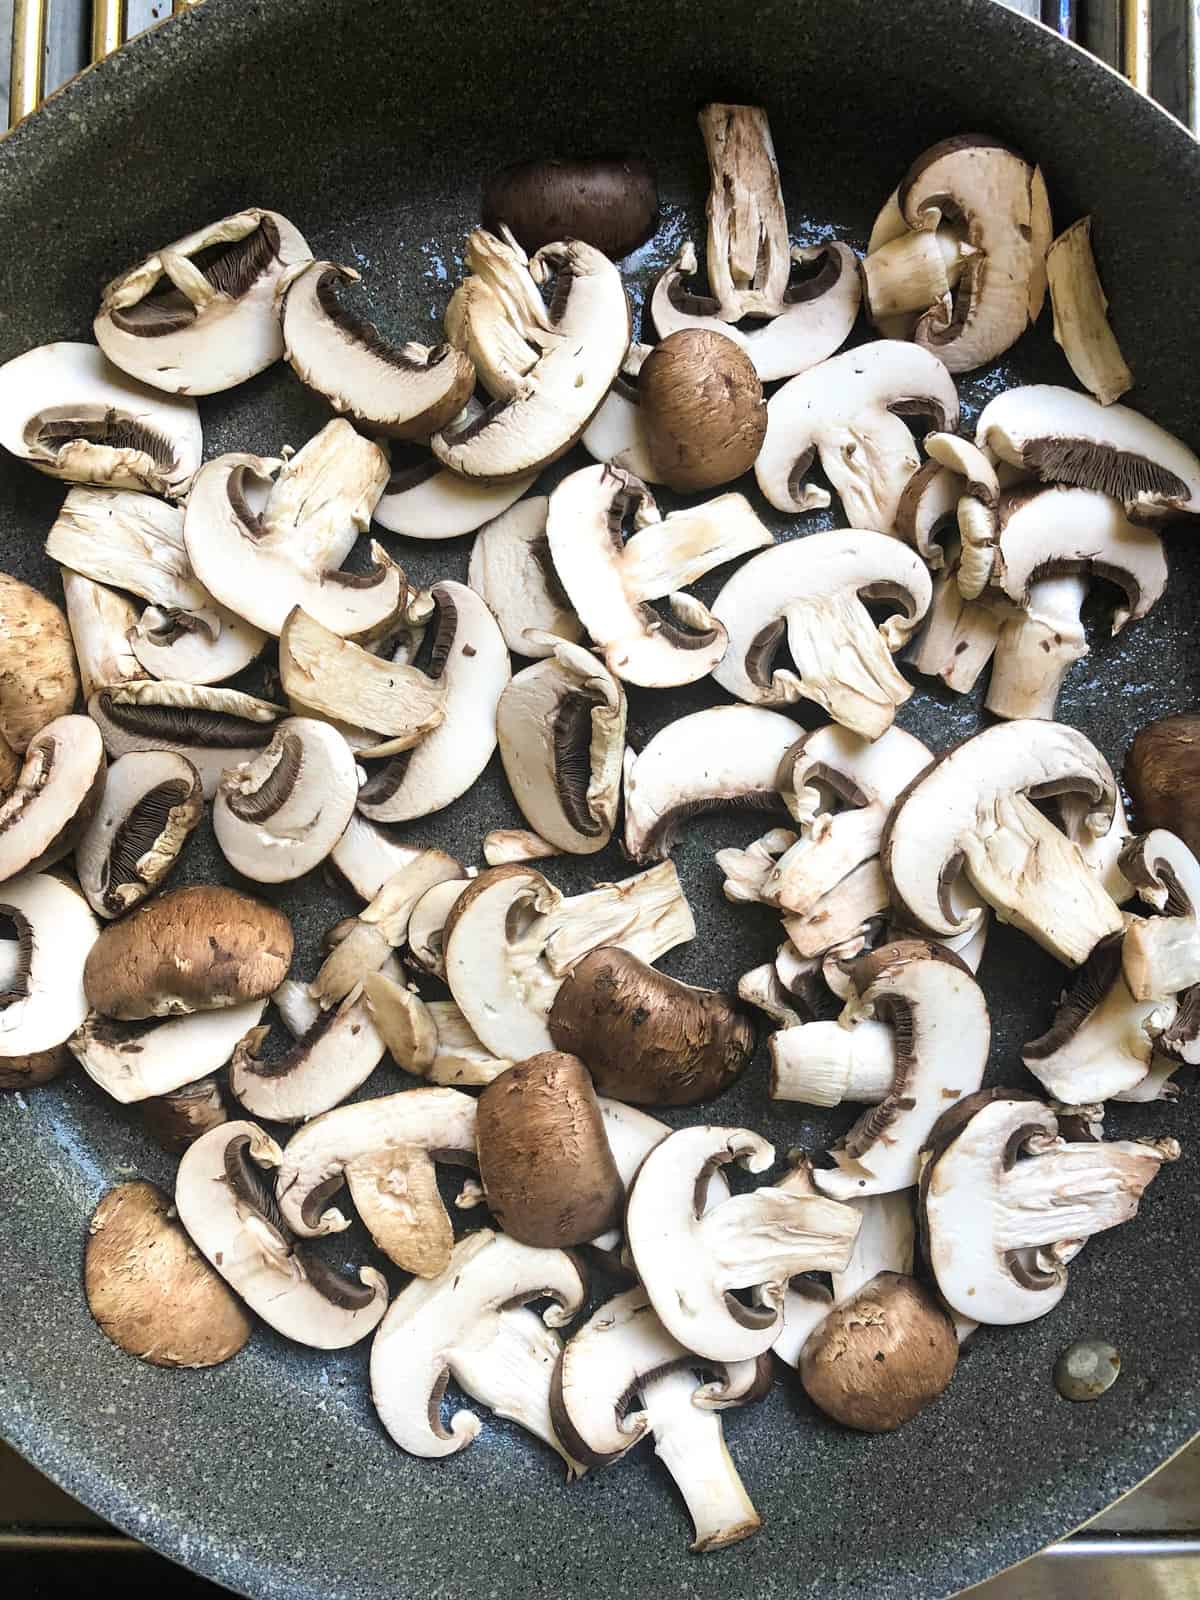 Thick-slice the mushrooms and place them in the pan, stirring until browned about 5-8 minutes.